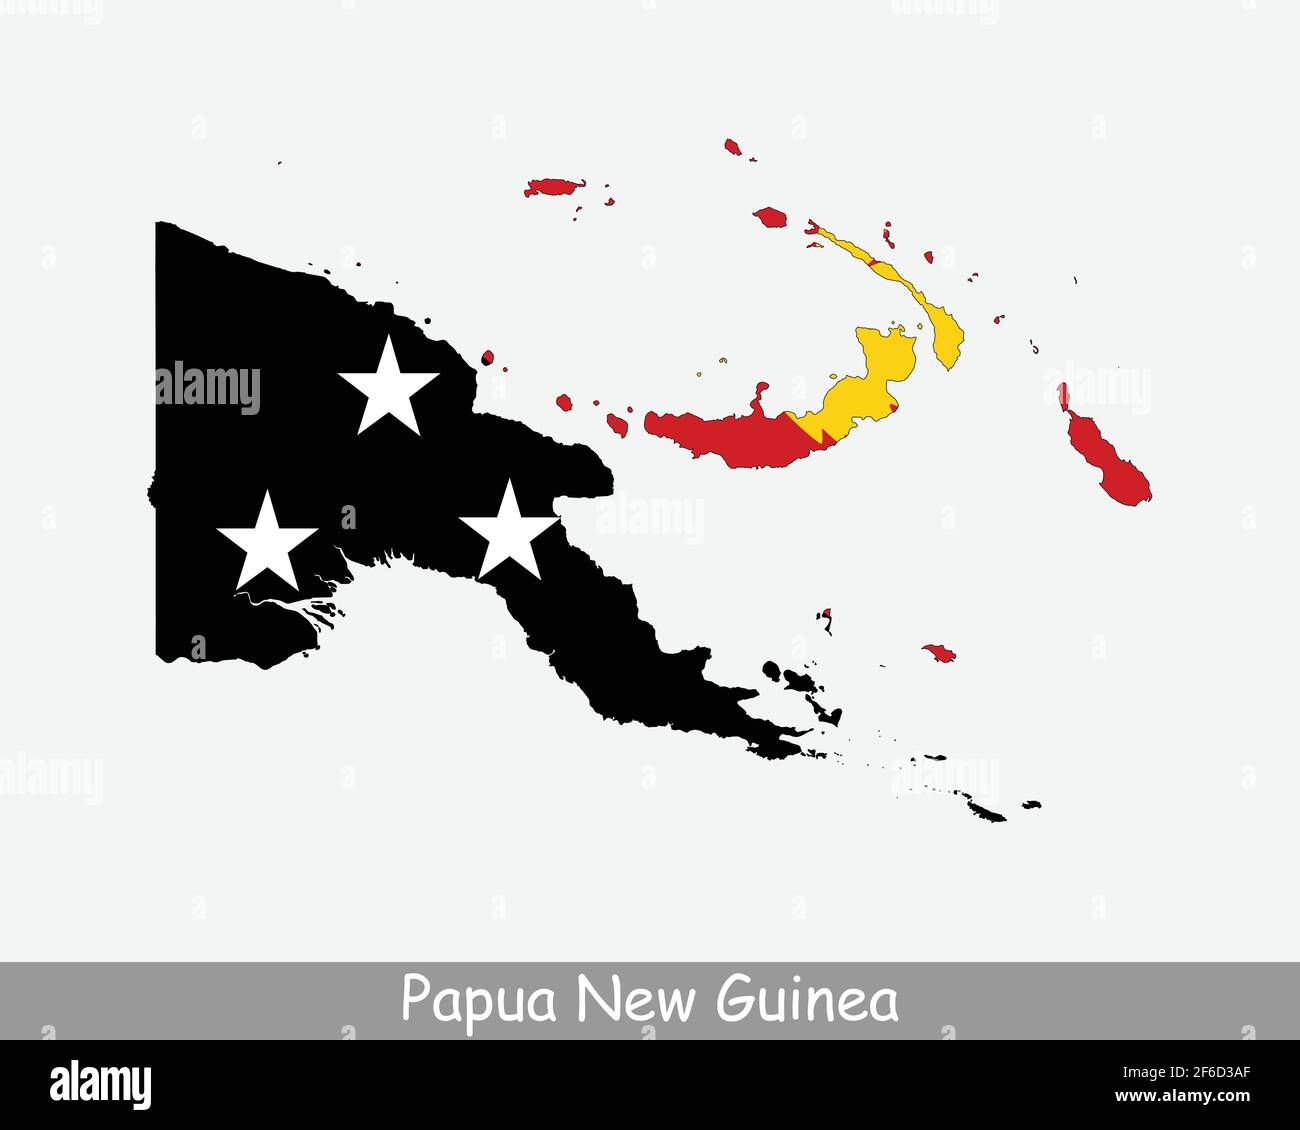 Papua New Guinea Flag Map. Map of the Independent State of Papua New Guinea with the Papua New Guinean national flag isolated on a white background. V Stock Vector